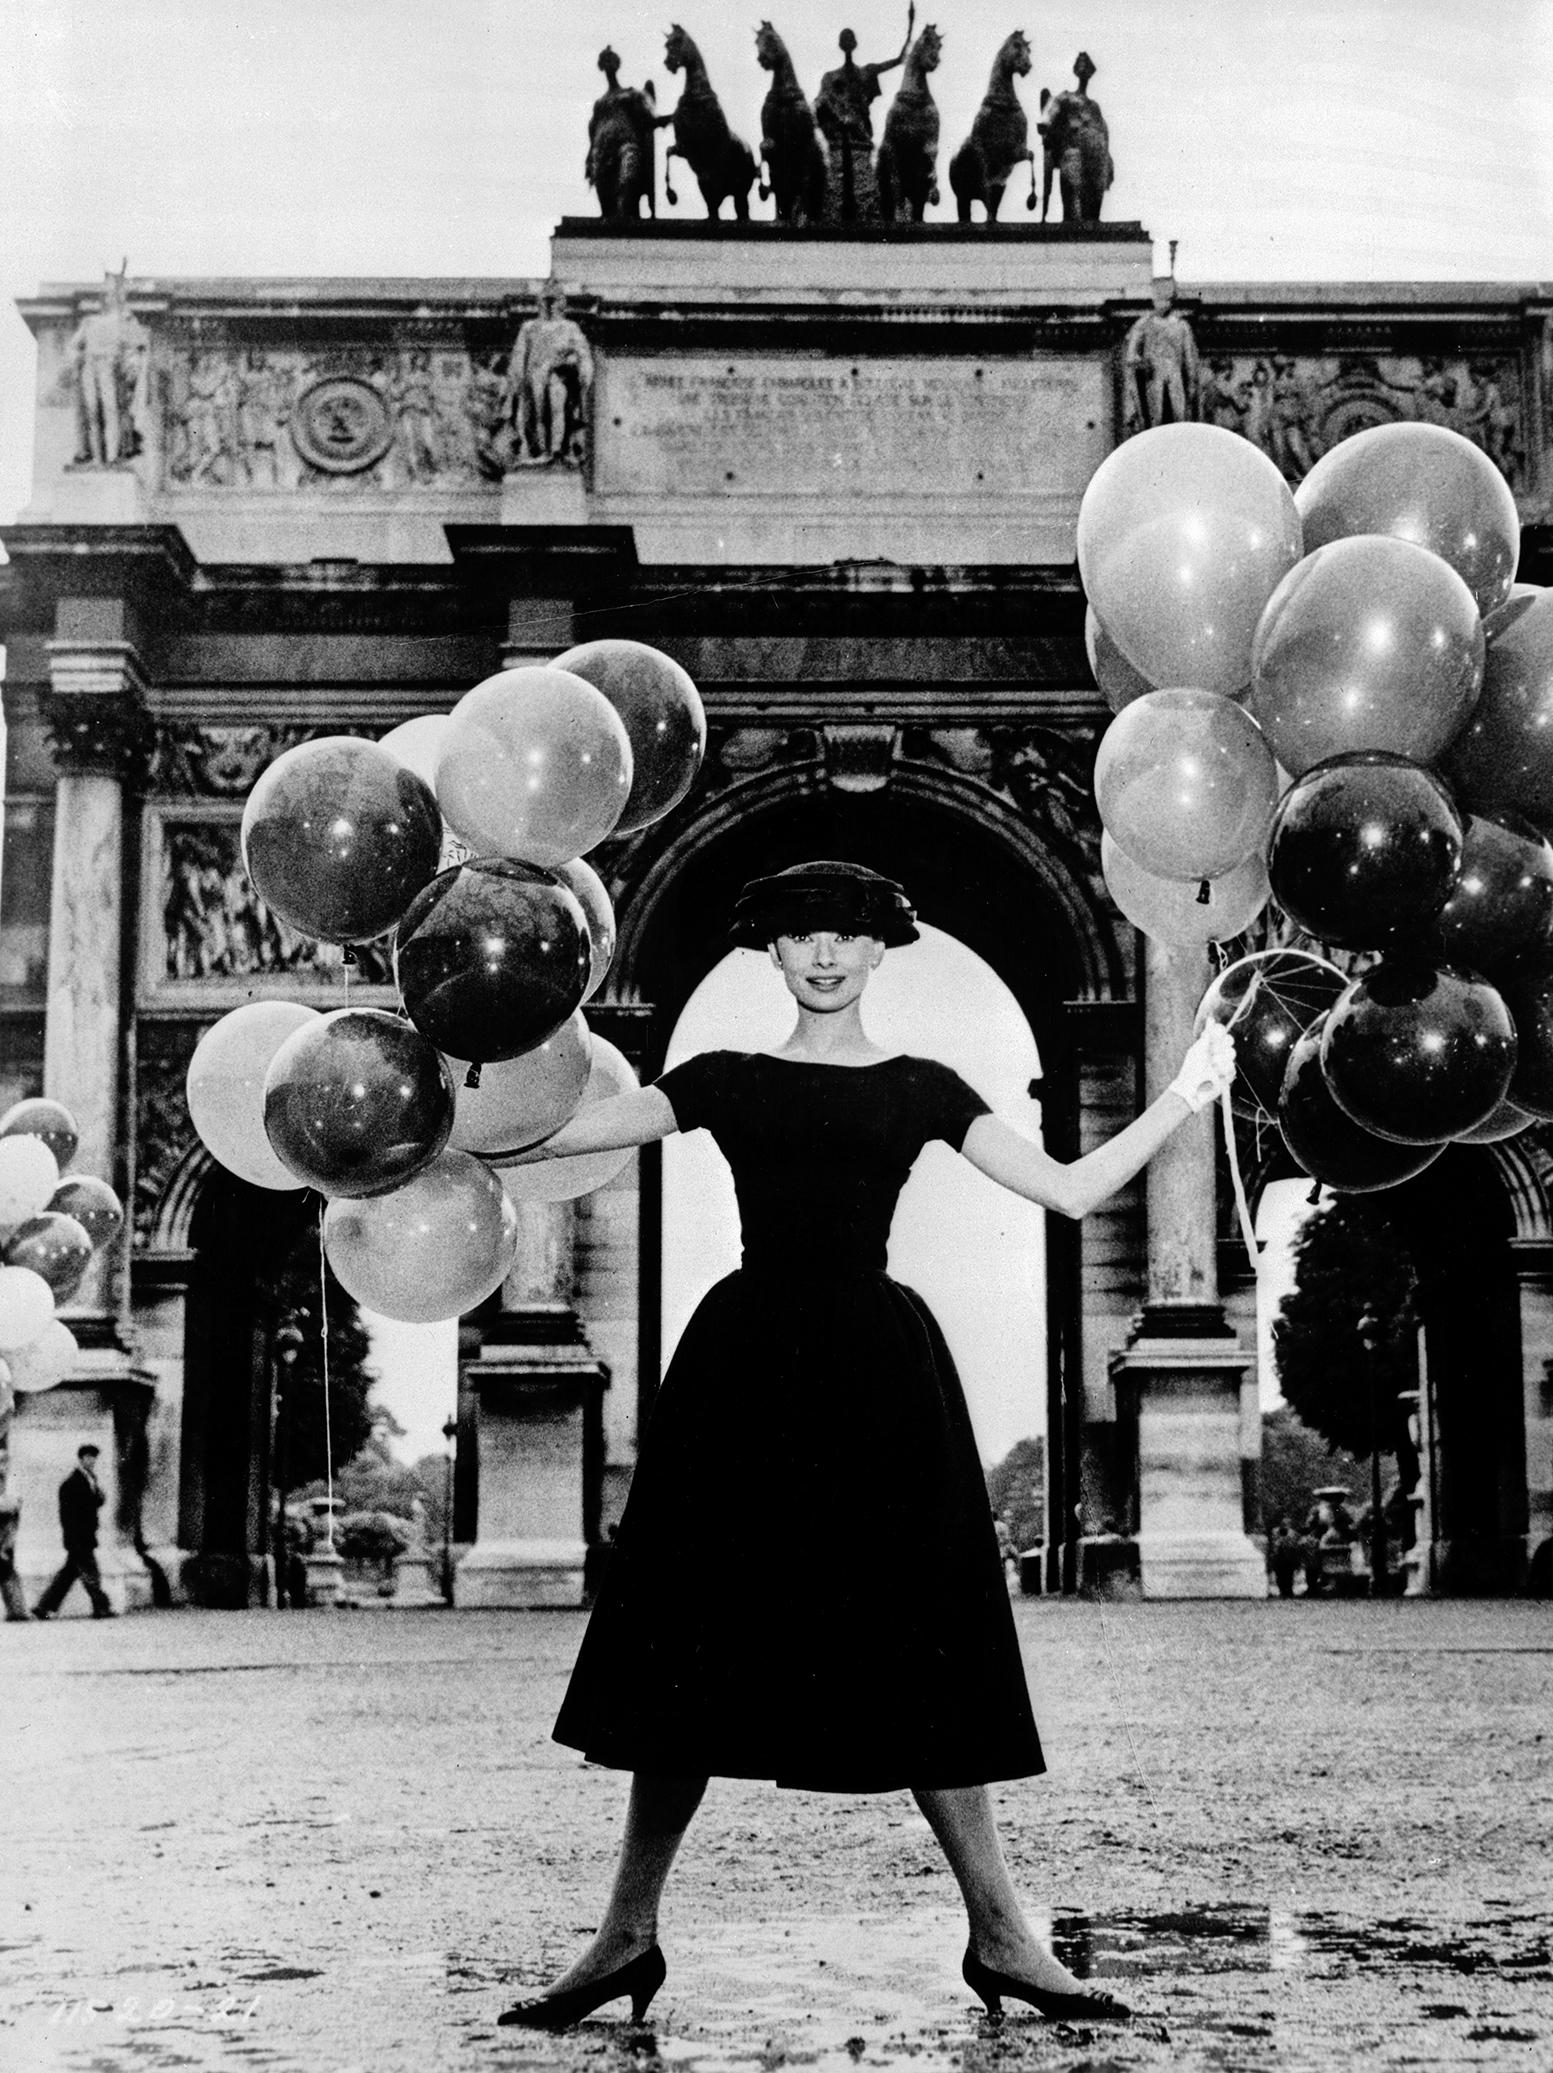 Unknown Black and White Photograph - Audrey Hepburn with Balloons at the Arc de Triomphe